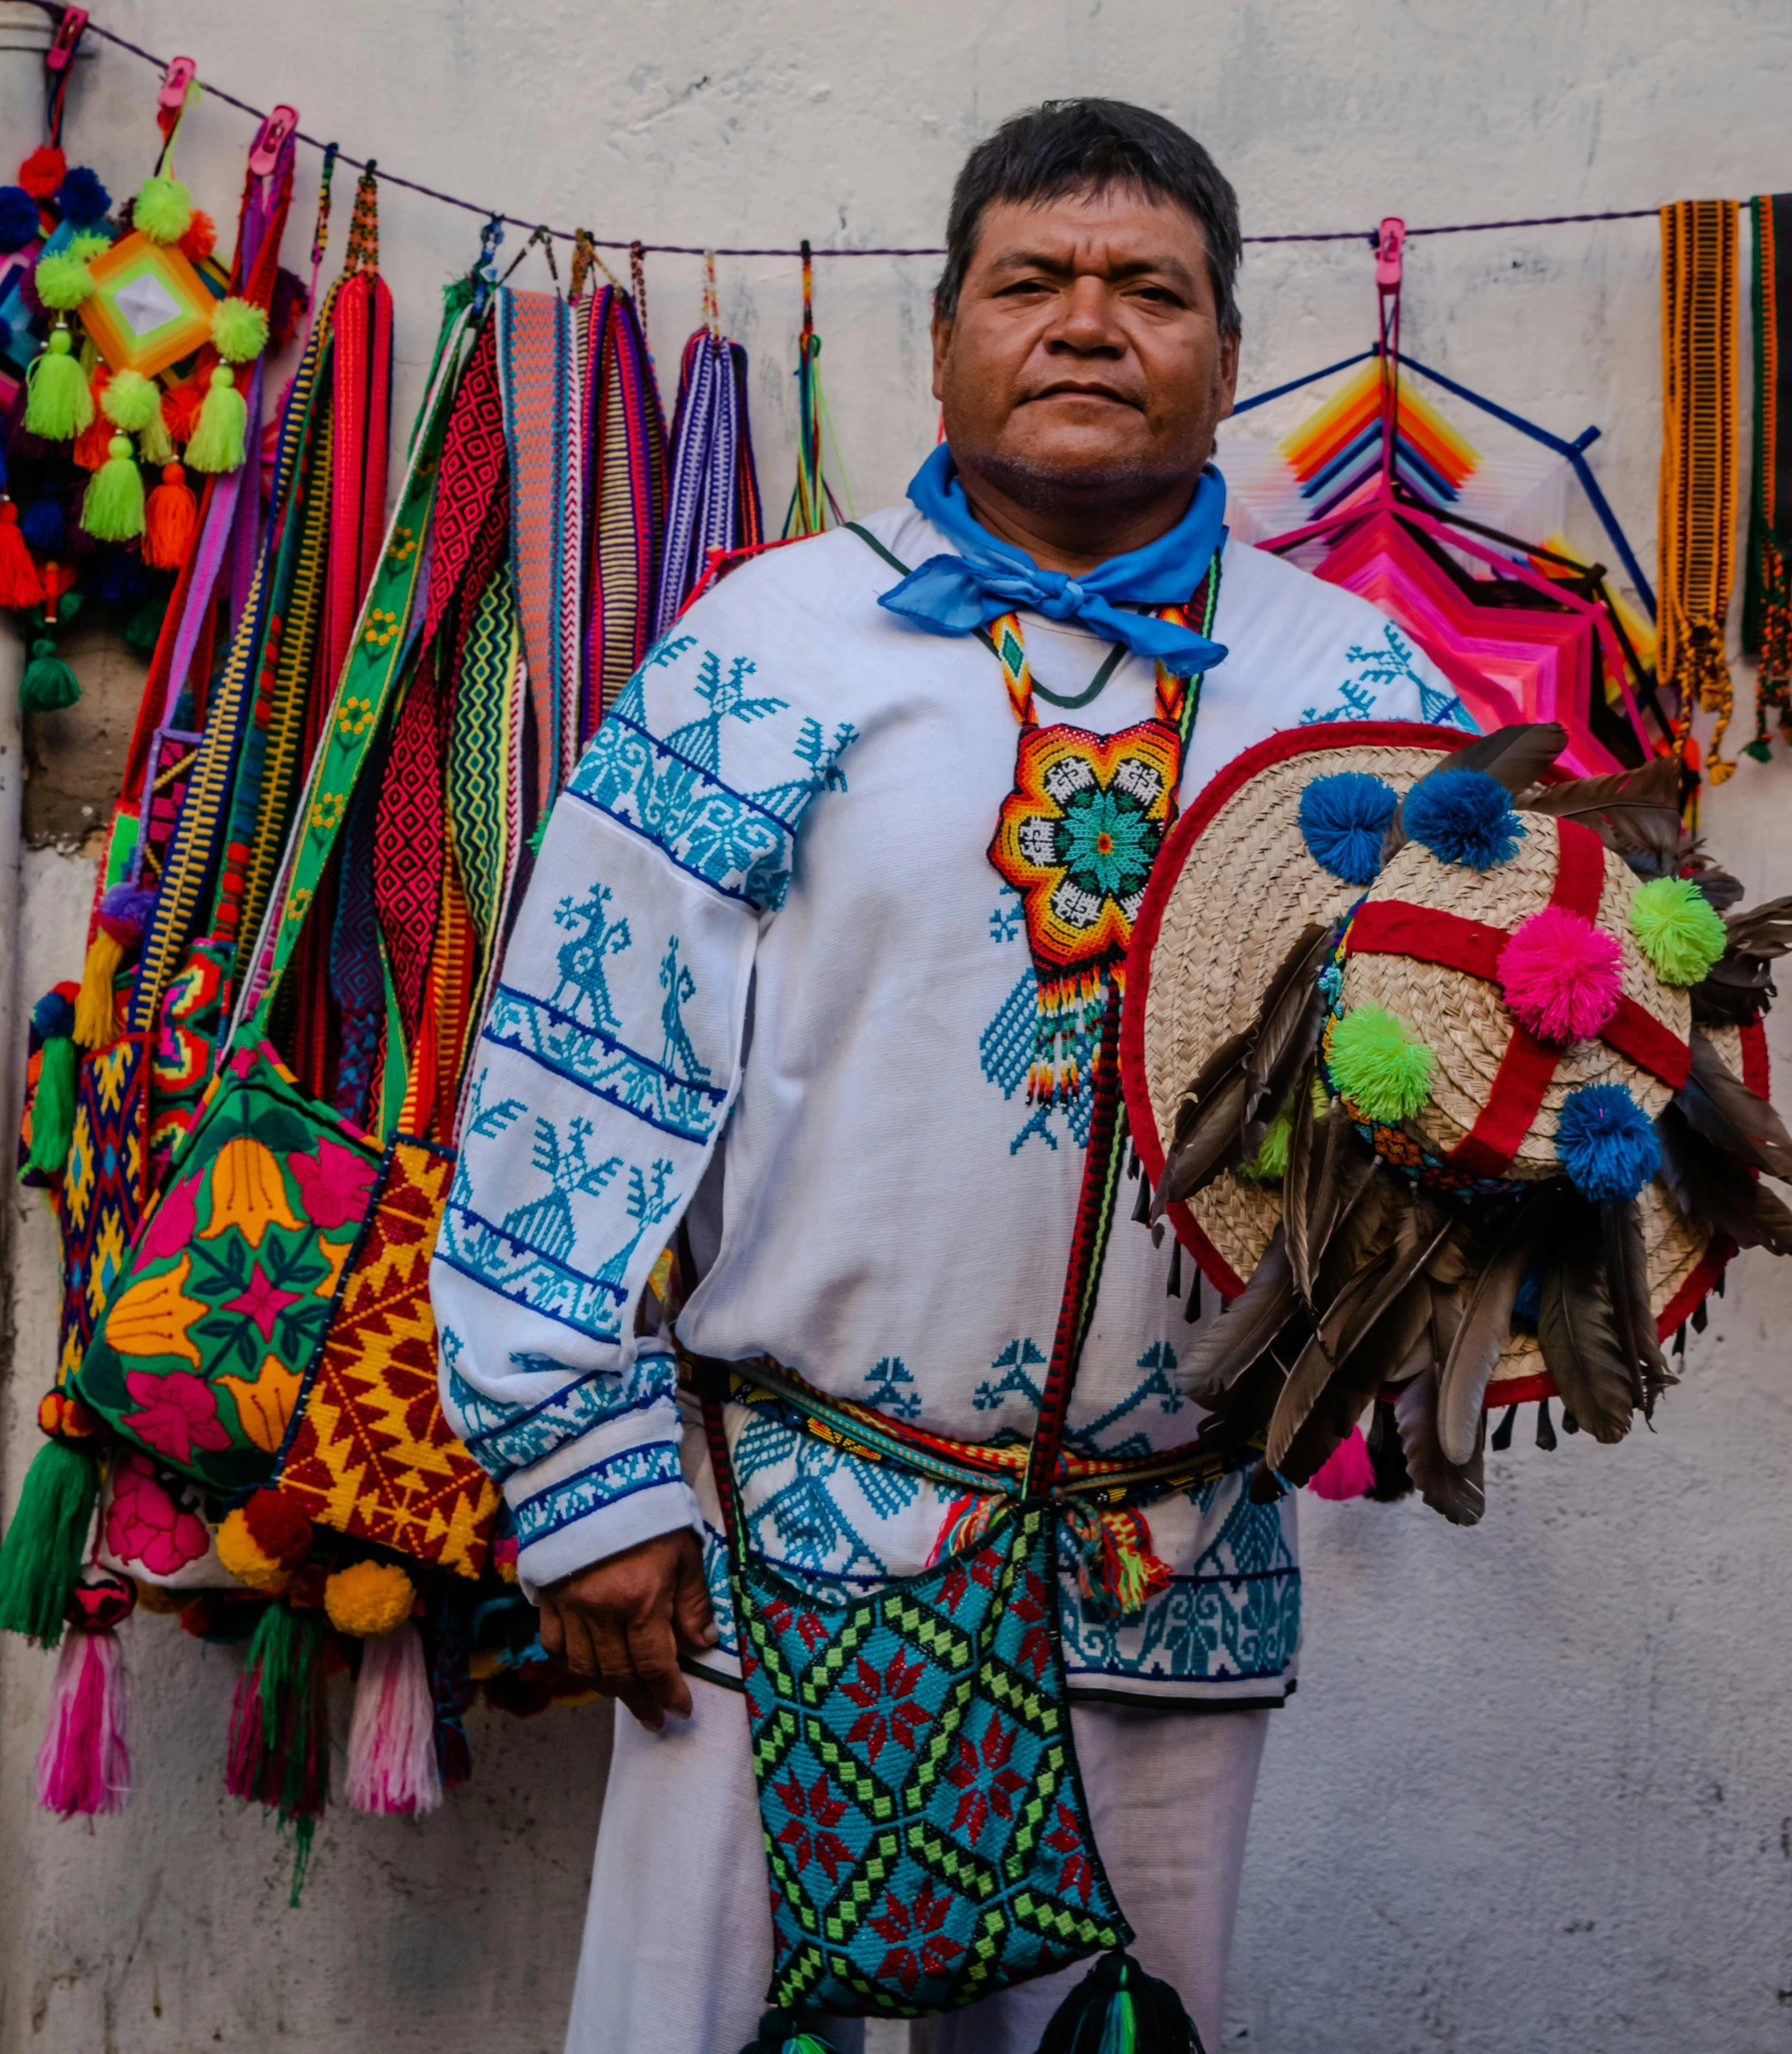 a man in white standing next to a wall with a collection of colorful accessories on it